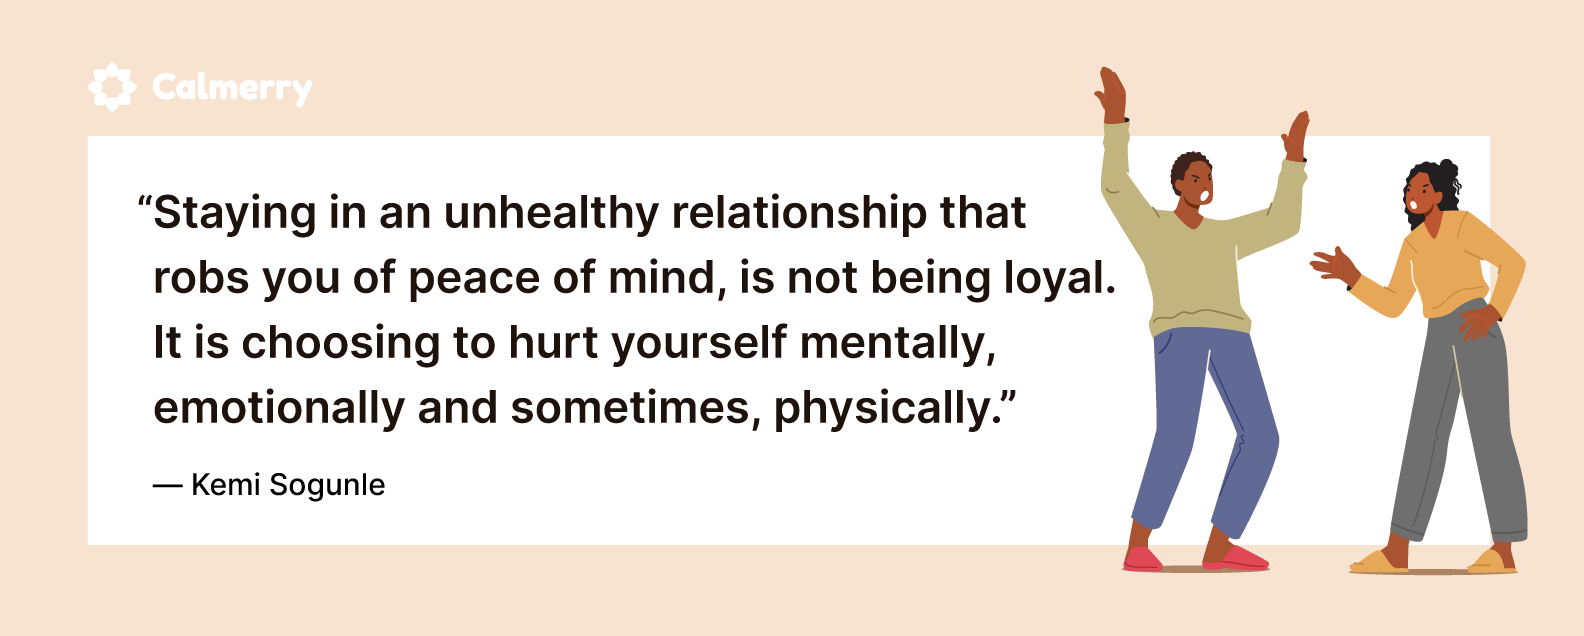 unhealthy relationship quote